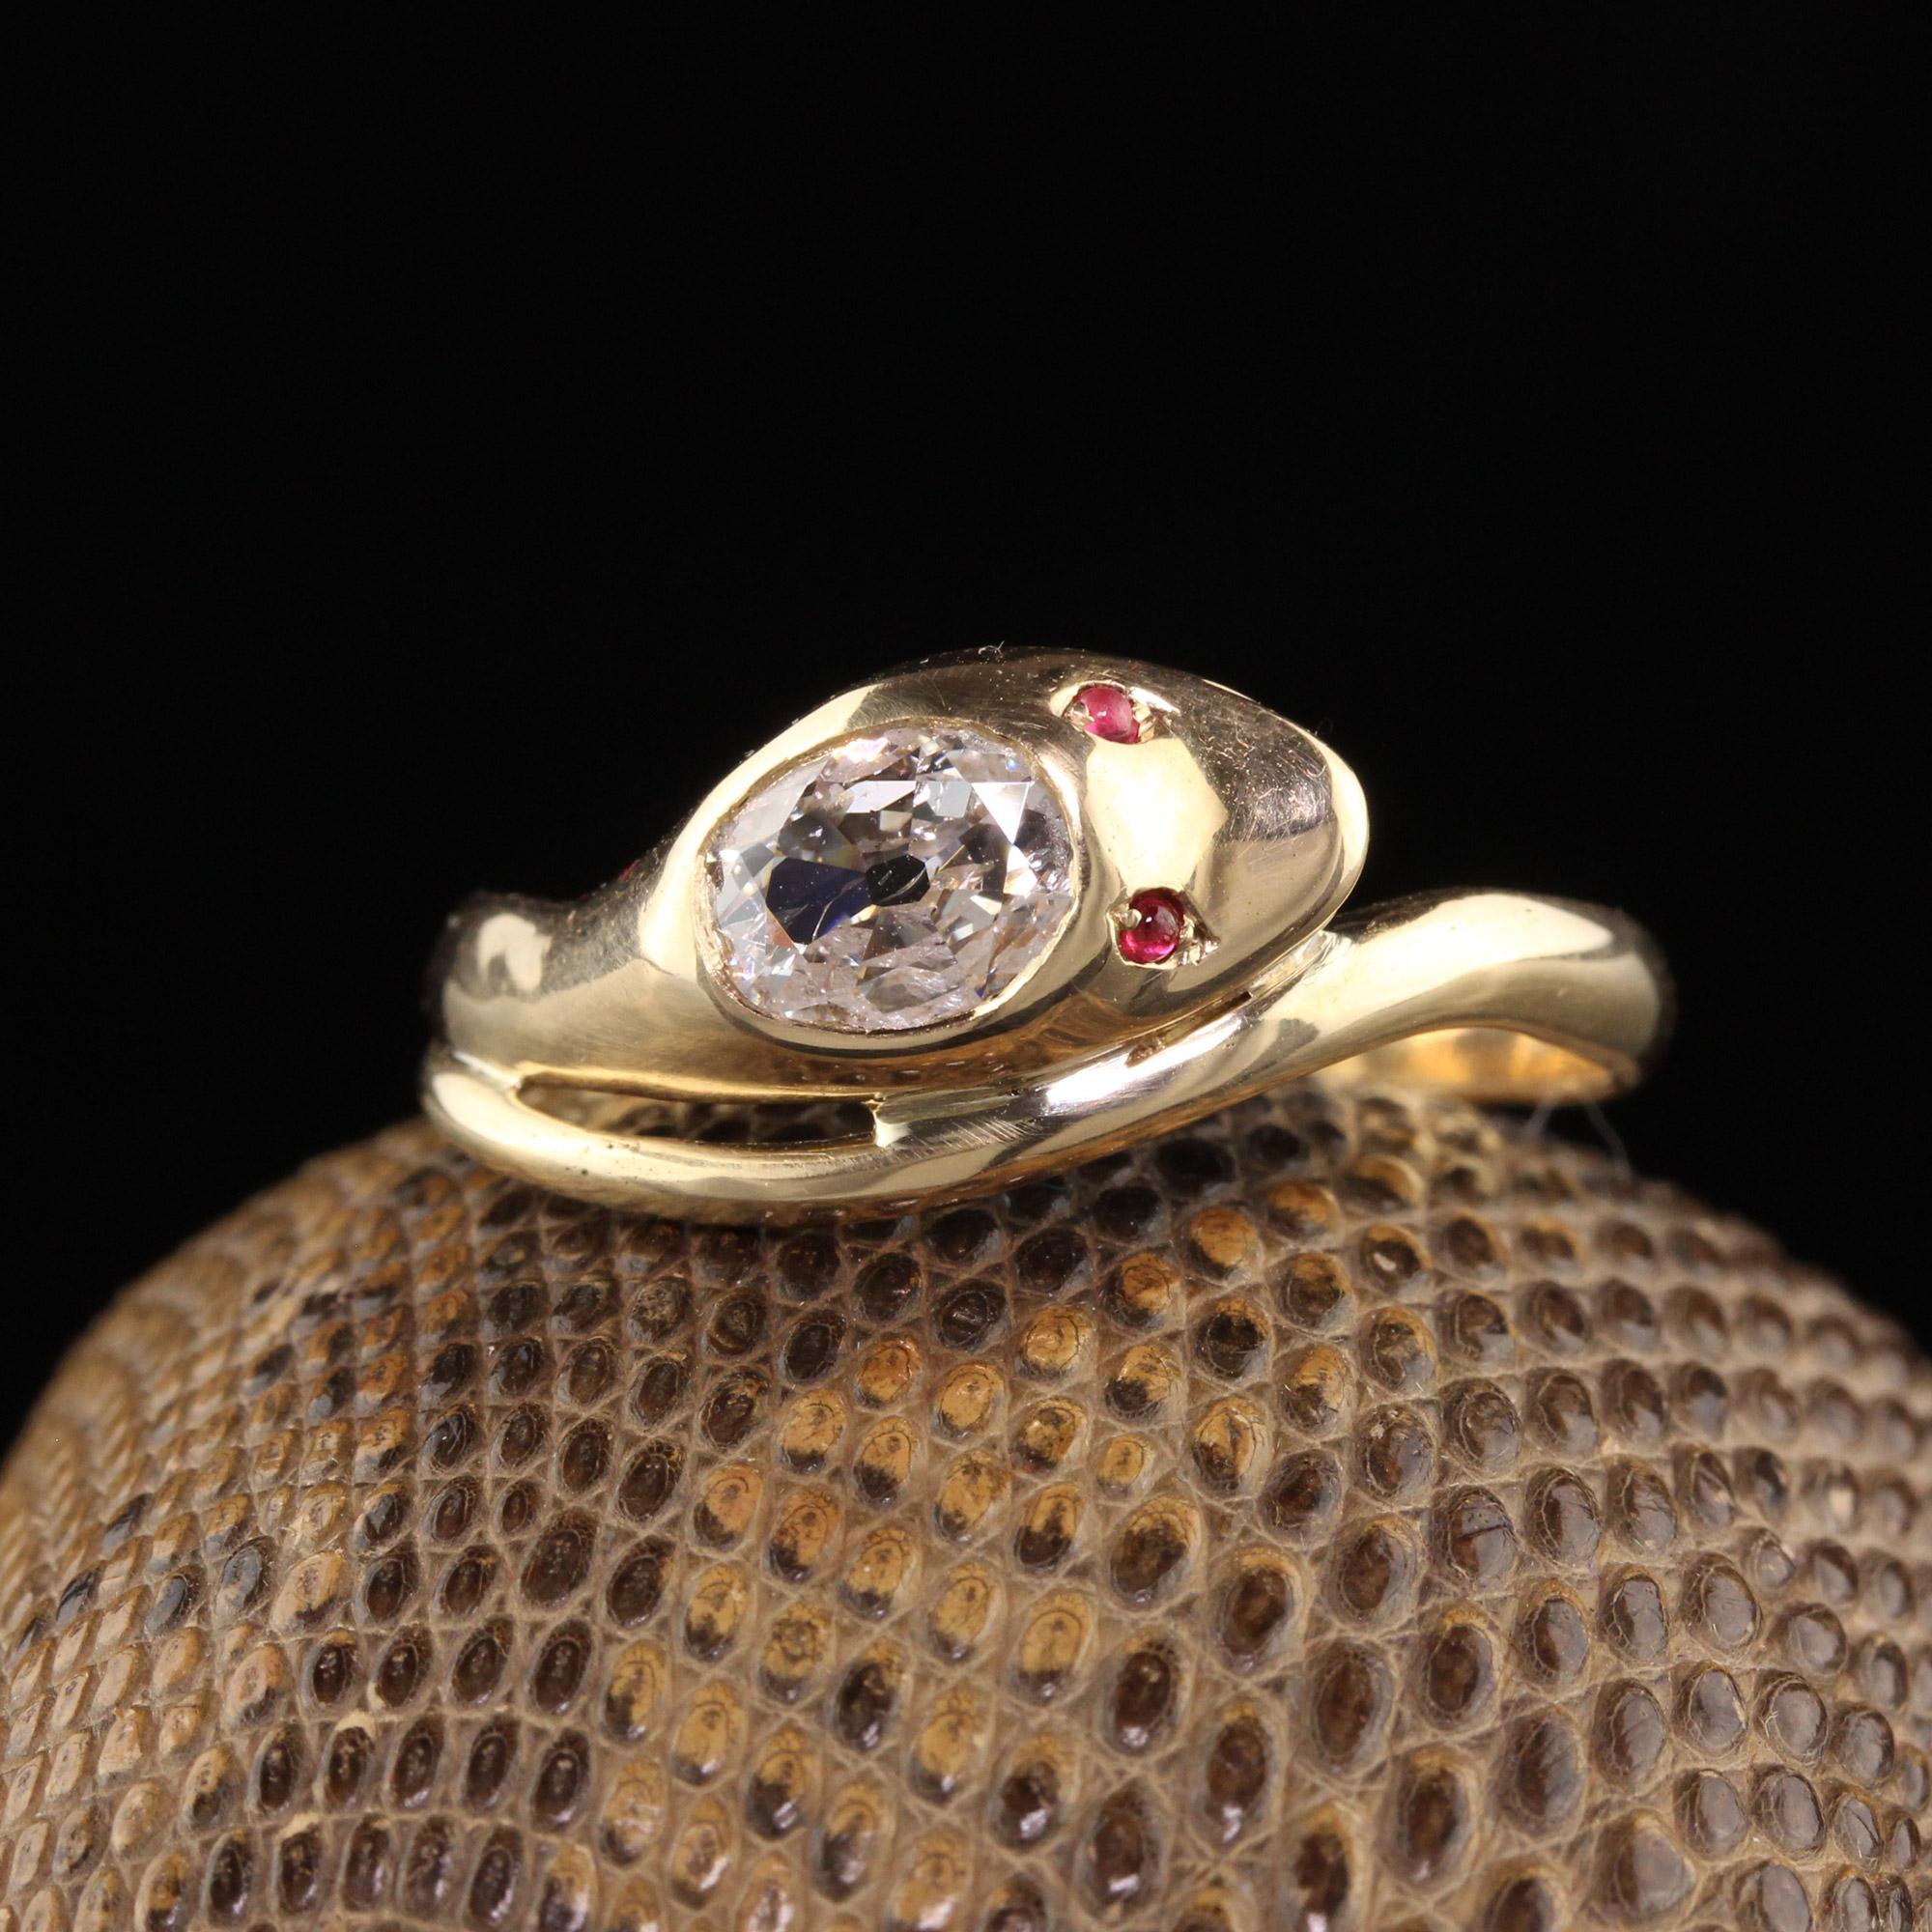 Beautiful Antique Victorian 18K Yellow Gold Old Mine Cut Diamond Snake Ring. This beautiful ring is crafted 18k yellow gold. The head of the snake has an old mine cut oval diamond on it that is flat and appears larger than it is. The eyes of the